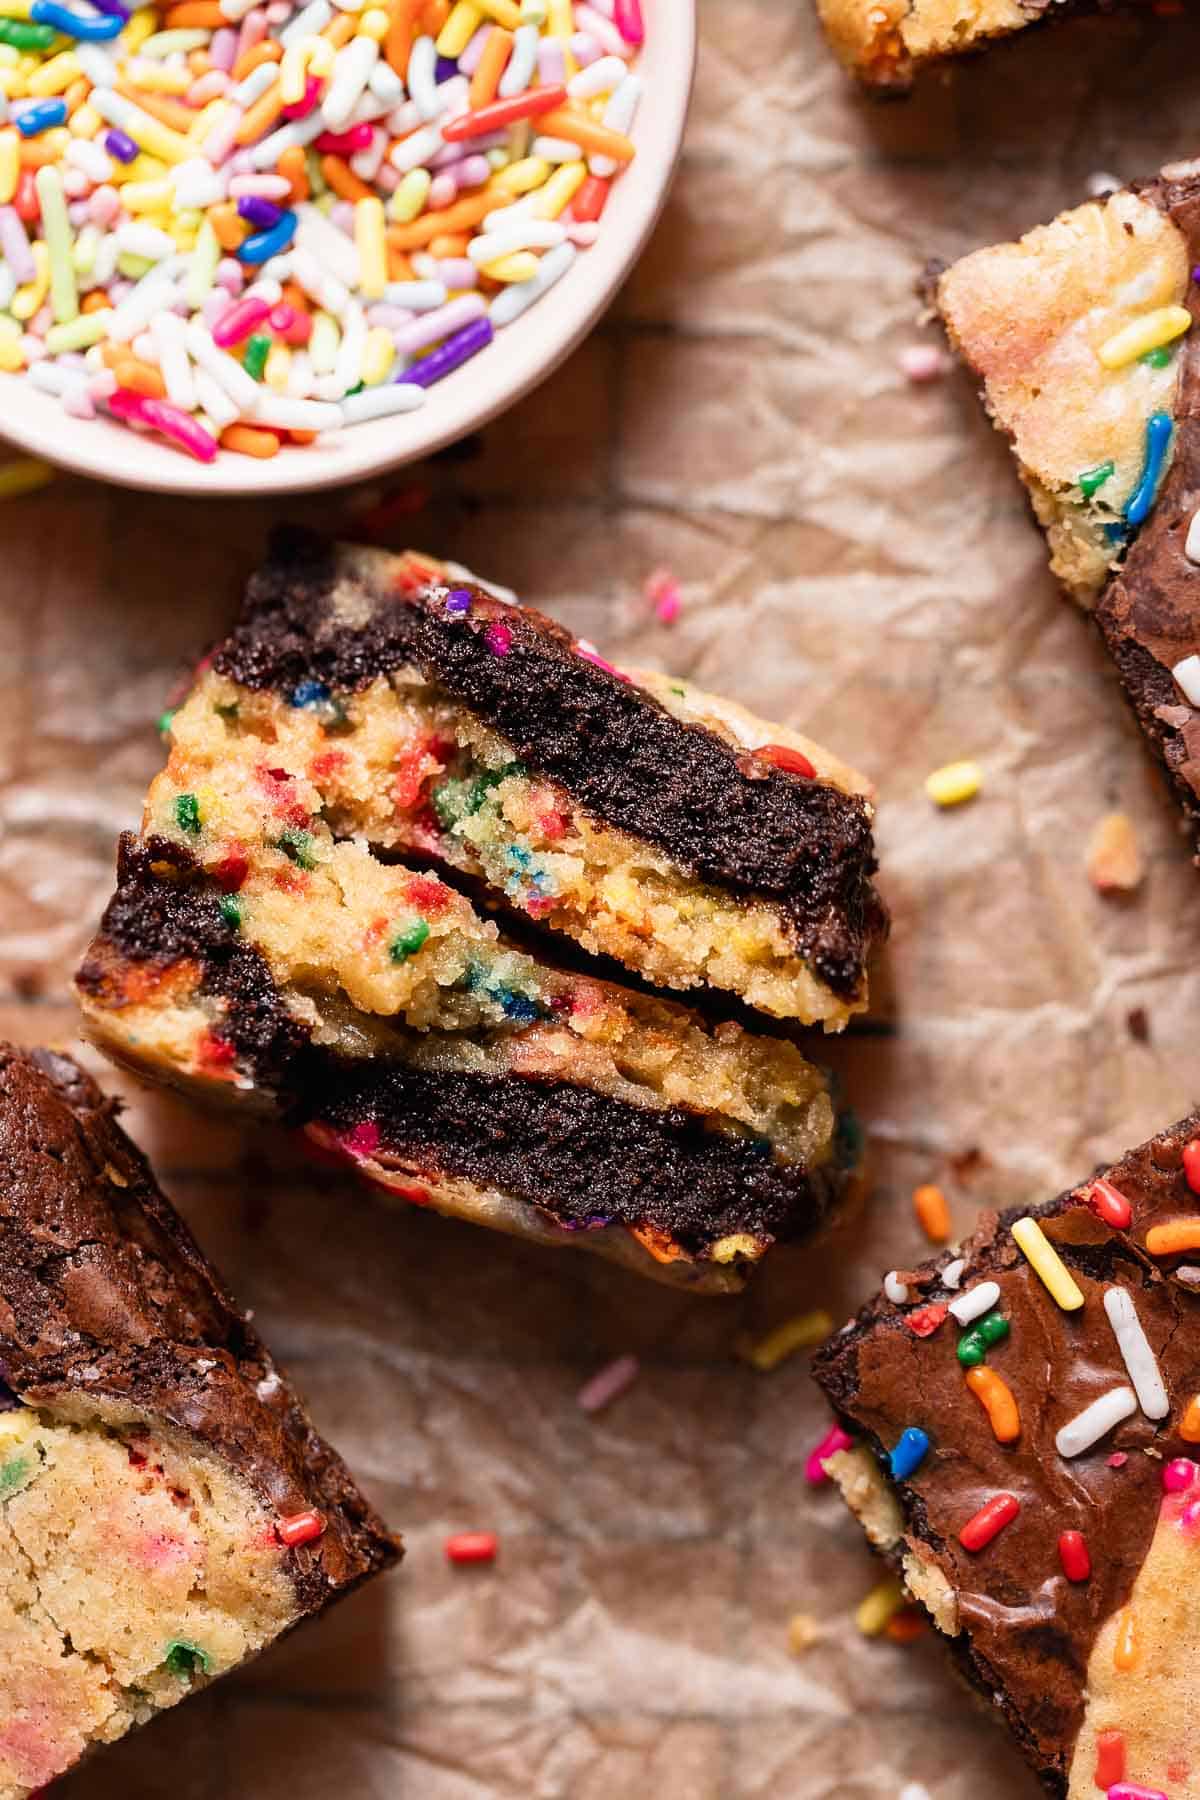 A birthday cake brownie split in half to show the fudgy texture.